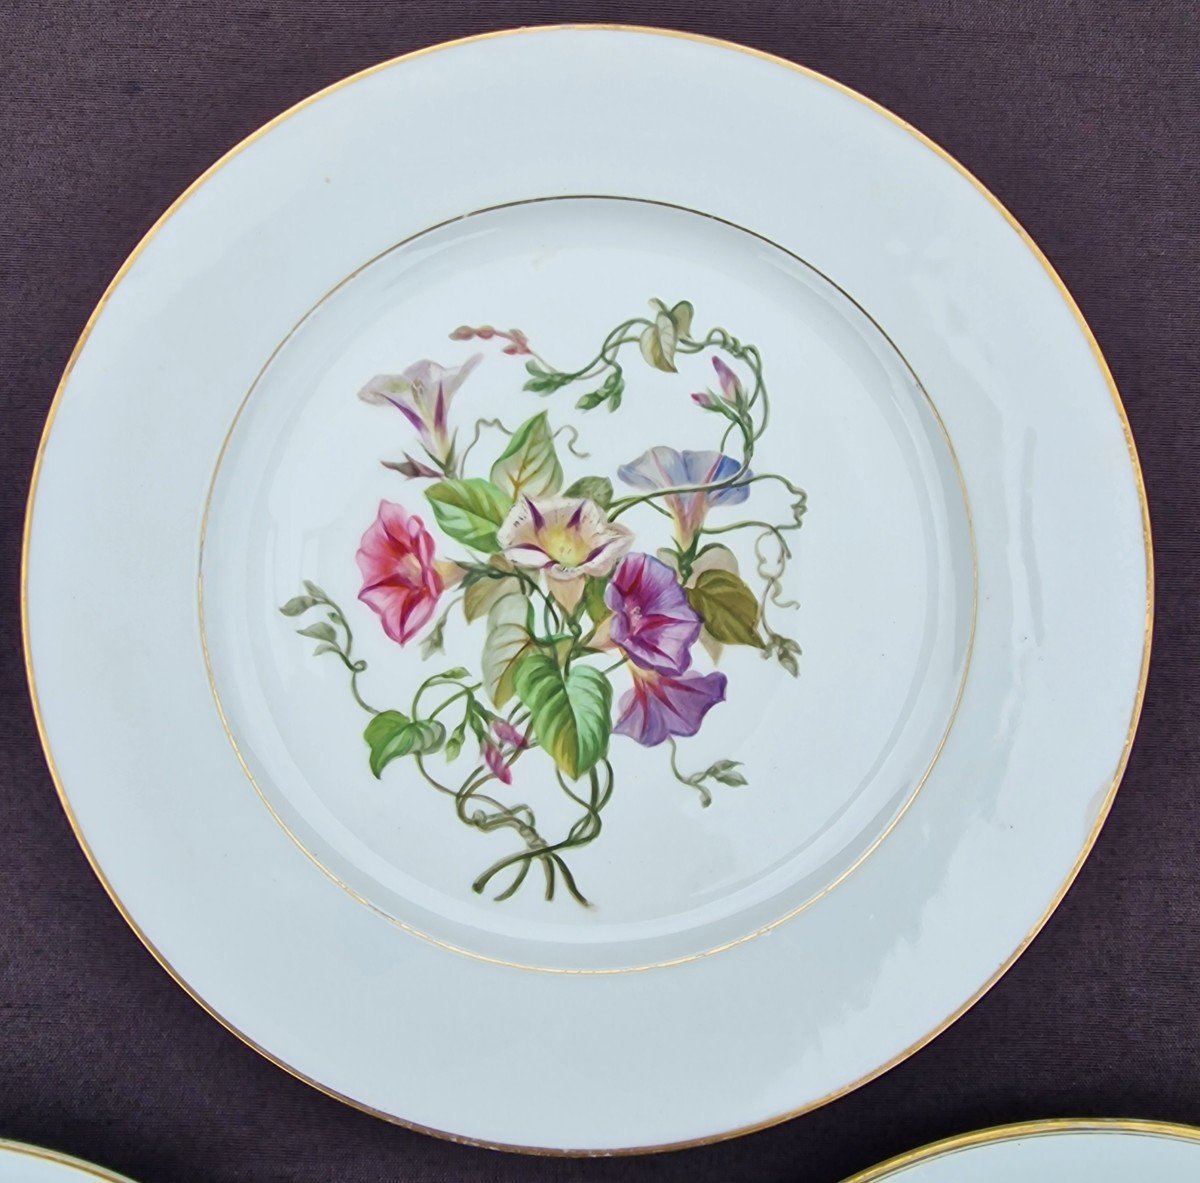 Lot Of 5 Sèvres Porcelain Plates From 1857 To 1864 Decorated With Bouquets Of Insect Flowers-photo-2